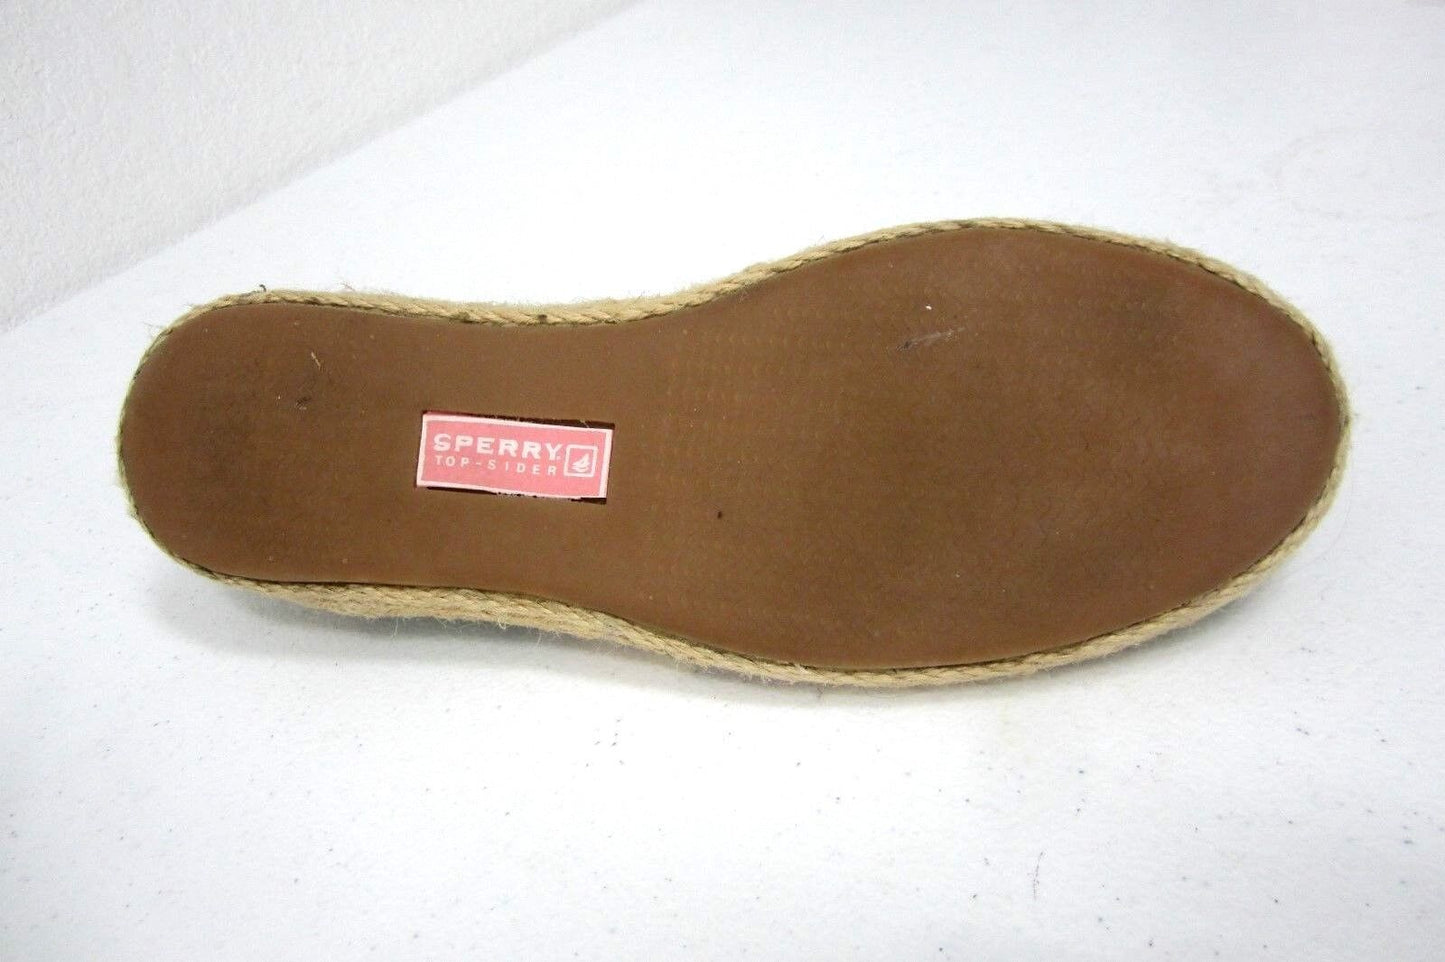 Sperry Top-Sider Tan Leather/Flowered Fabric Pink Bow Boat Shoe Women Size 8.5M